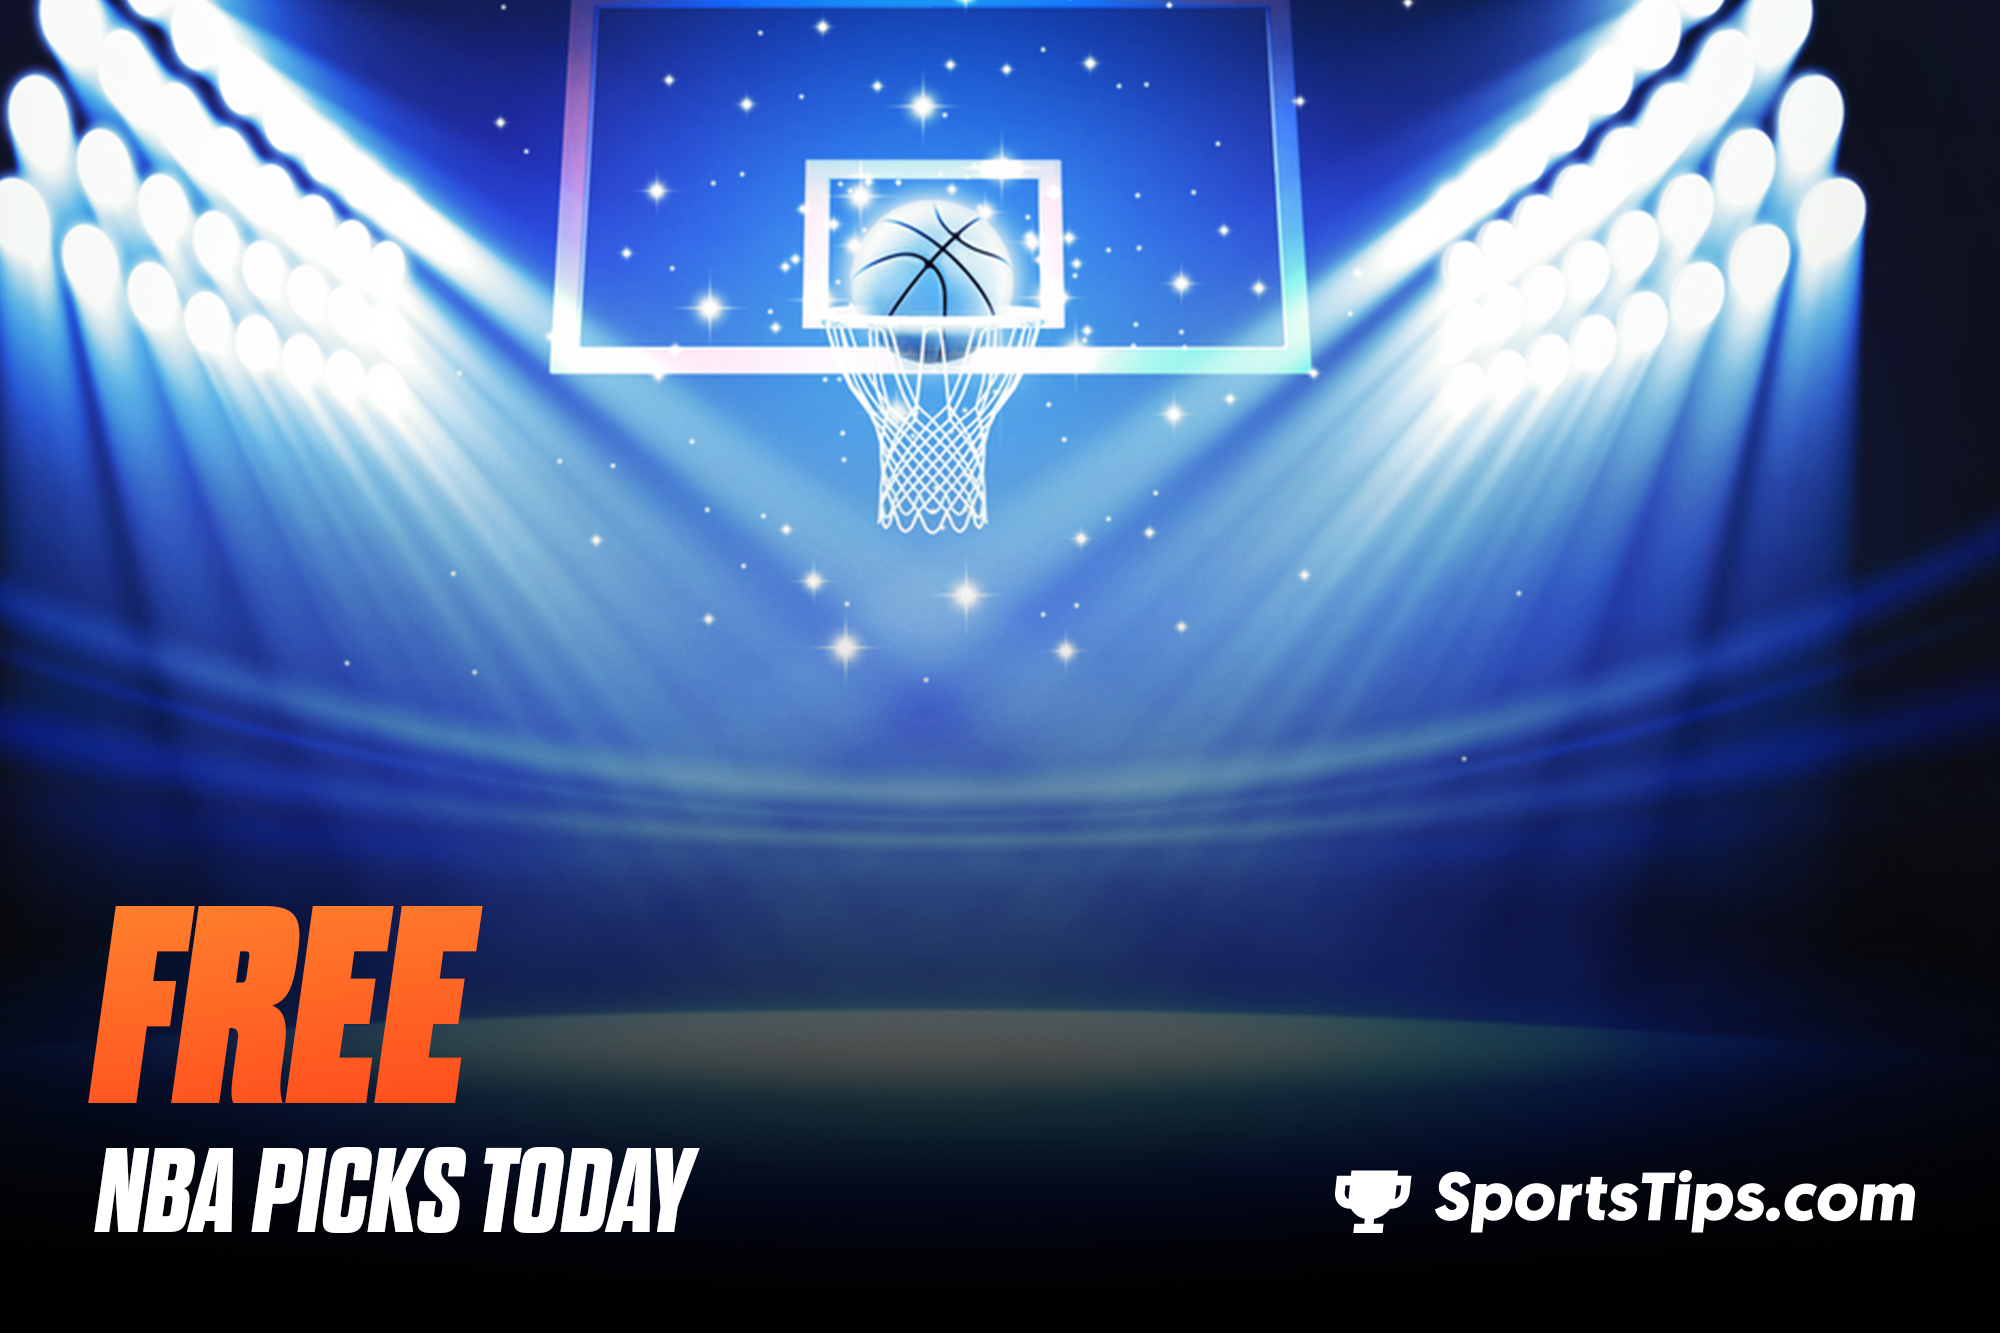 NBA All-Star Game 2023: Free NBA Picks Today For 3-Point and Slam Dunk Contest